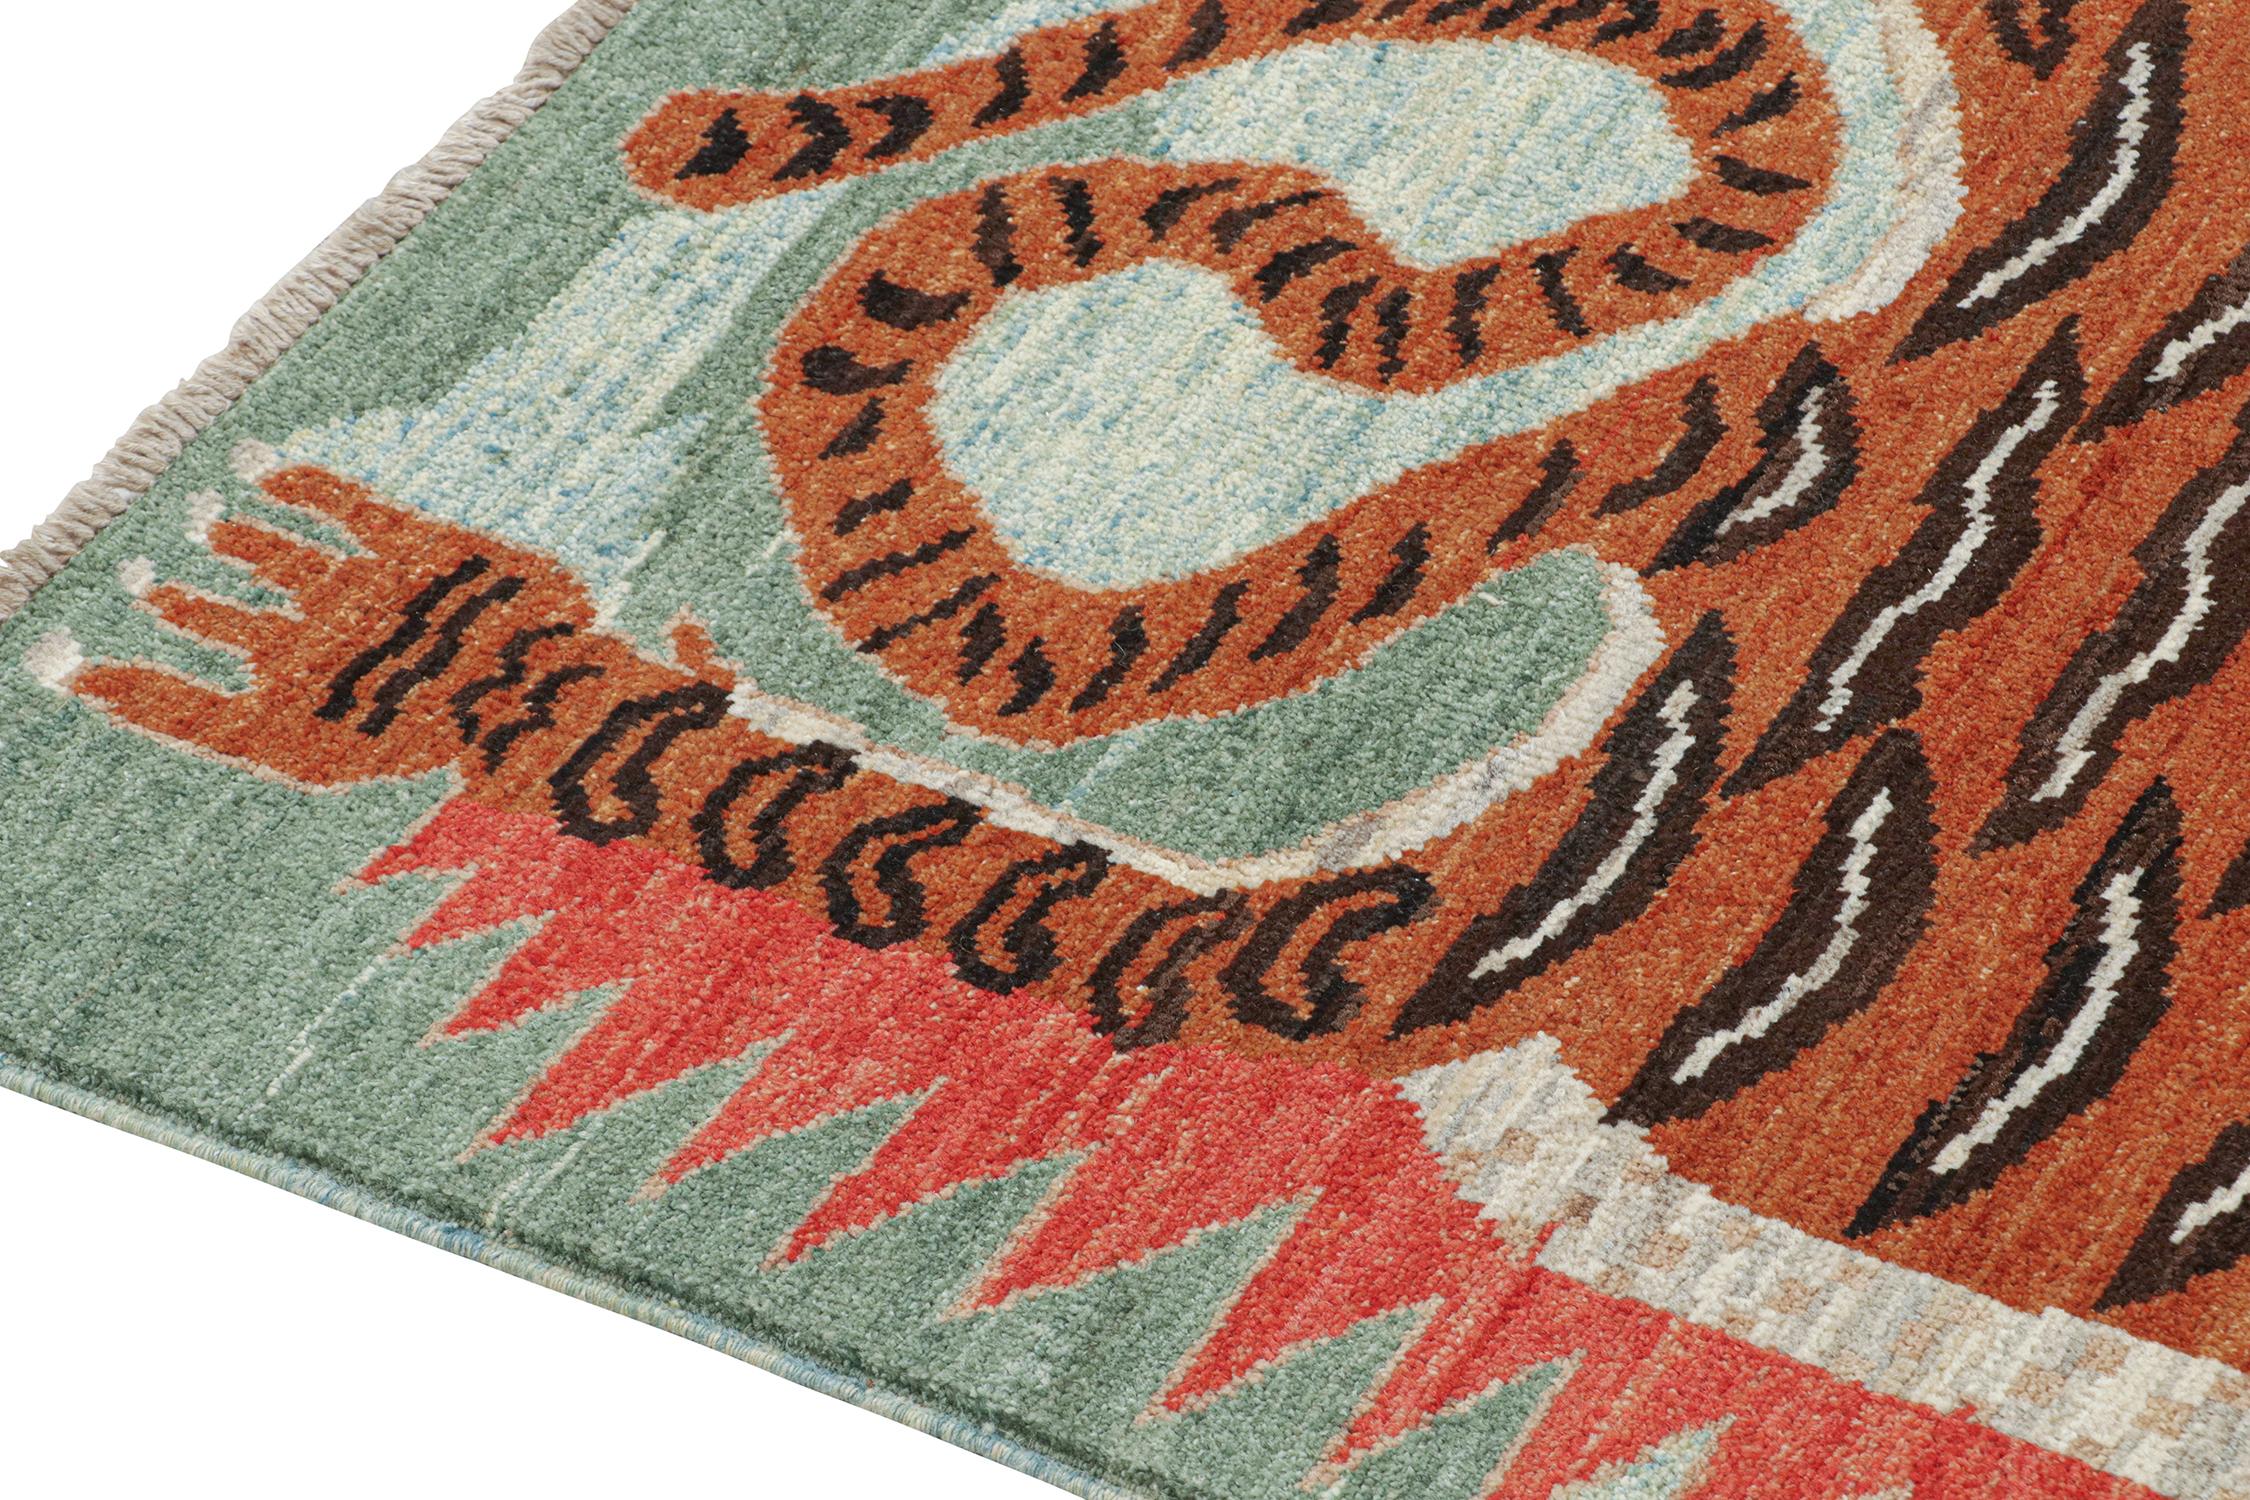 Rug & Kilim’s Classic Style Tiger-Skin Runner with Orange and Brown Pictorial In New Condition For Sale In Long Island City, NY